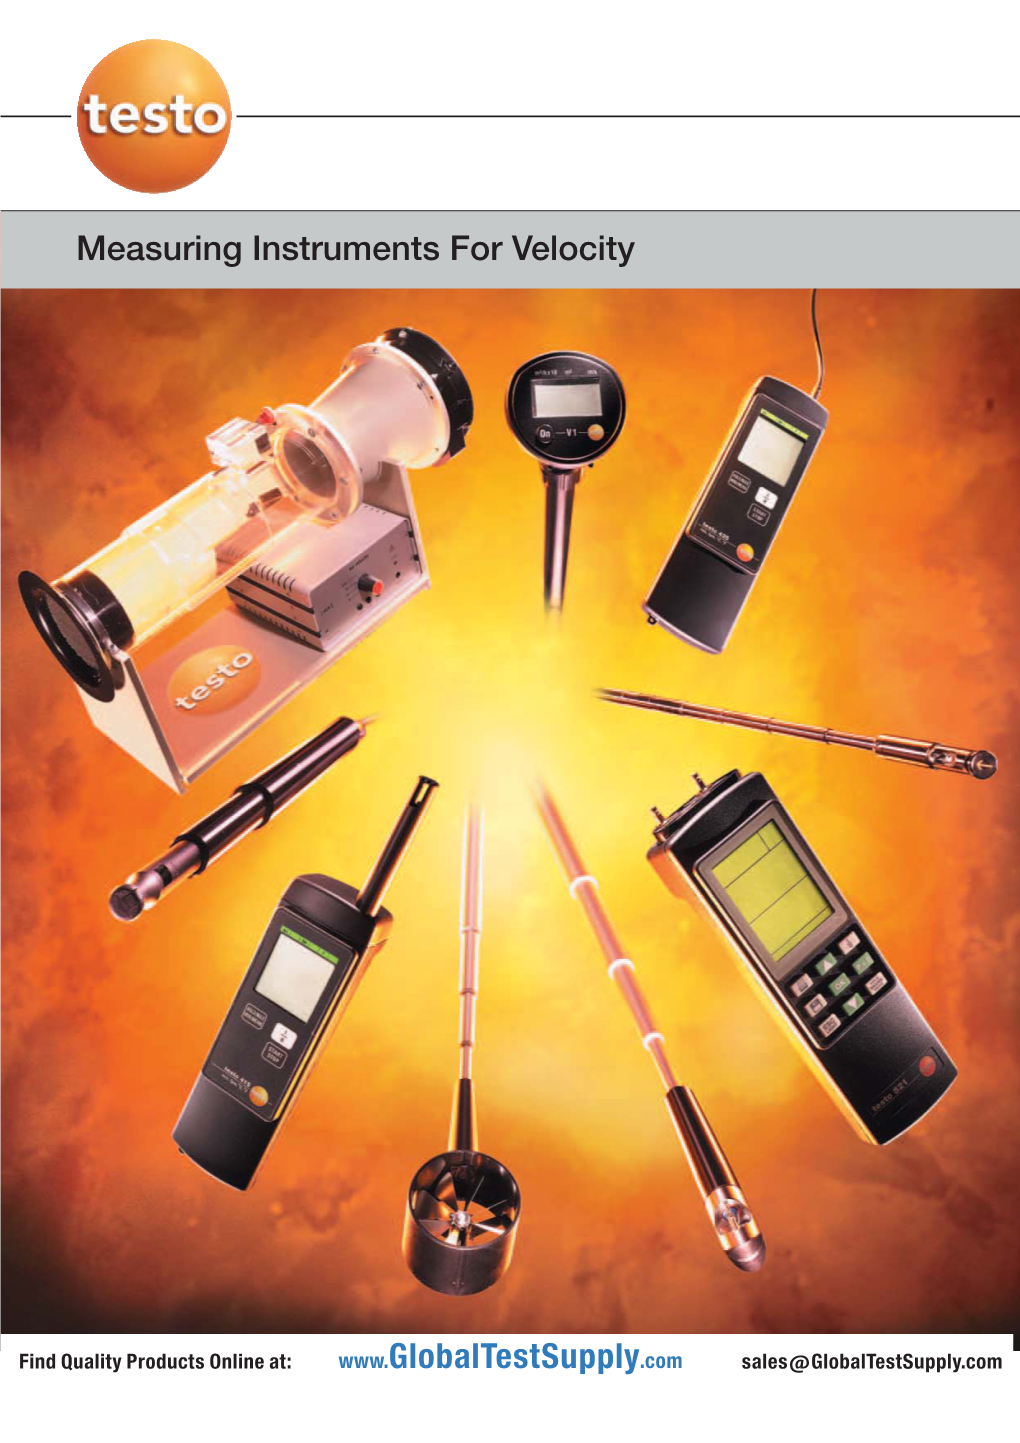 Measuring Instruments for Velocity